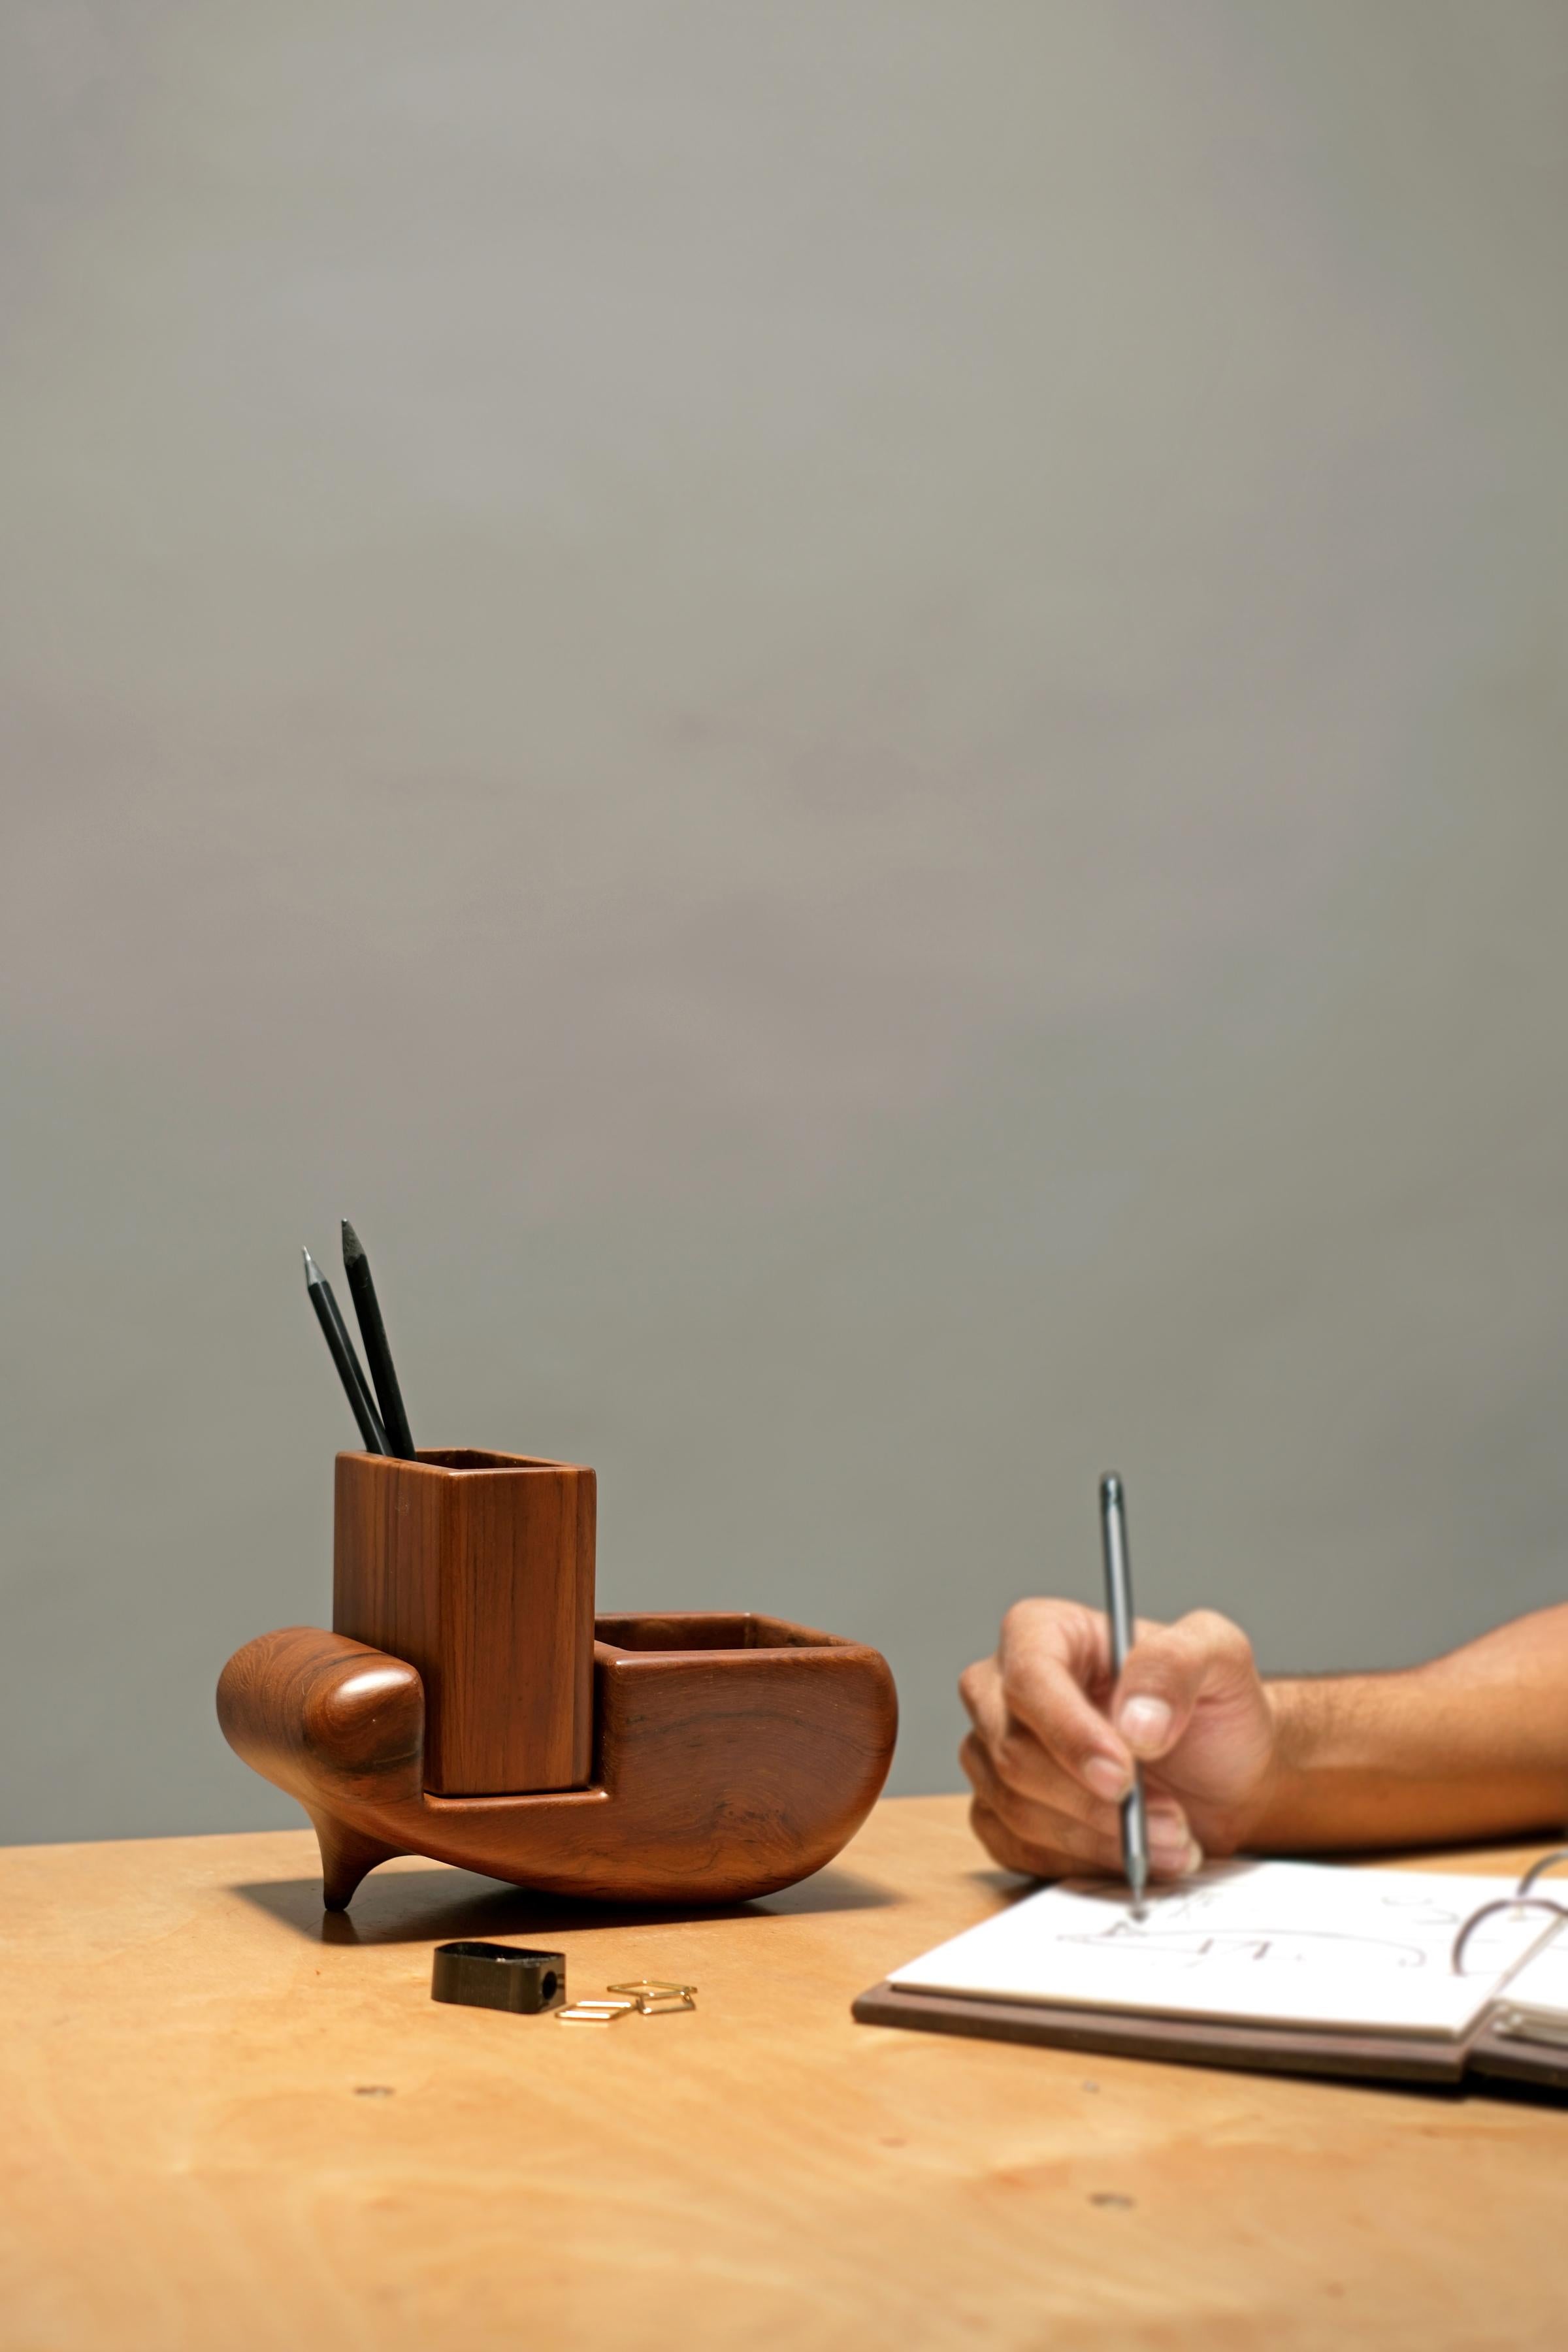 Sculp Stationery Holder by Studio Indigene
Dimensions: D 19.68 x W 10.16 x H 13.33 cm
Materials: Reclaimed Teak Wood.
Colors Brown, Natural Wooden Finish.

The Sculp Stationery Holder, made from reclaimed teak, is a visually stunning addition to any